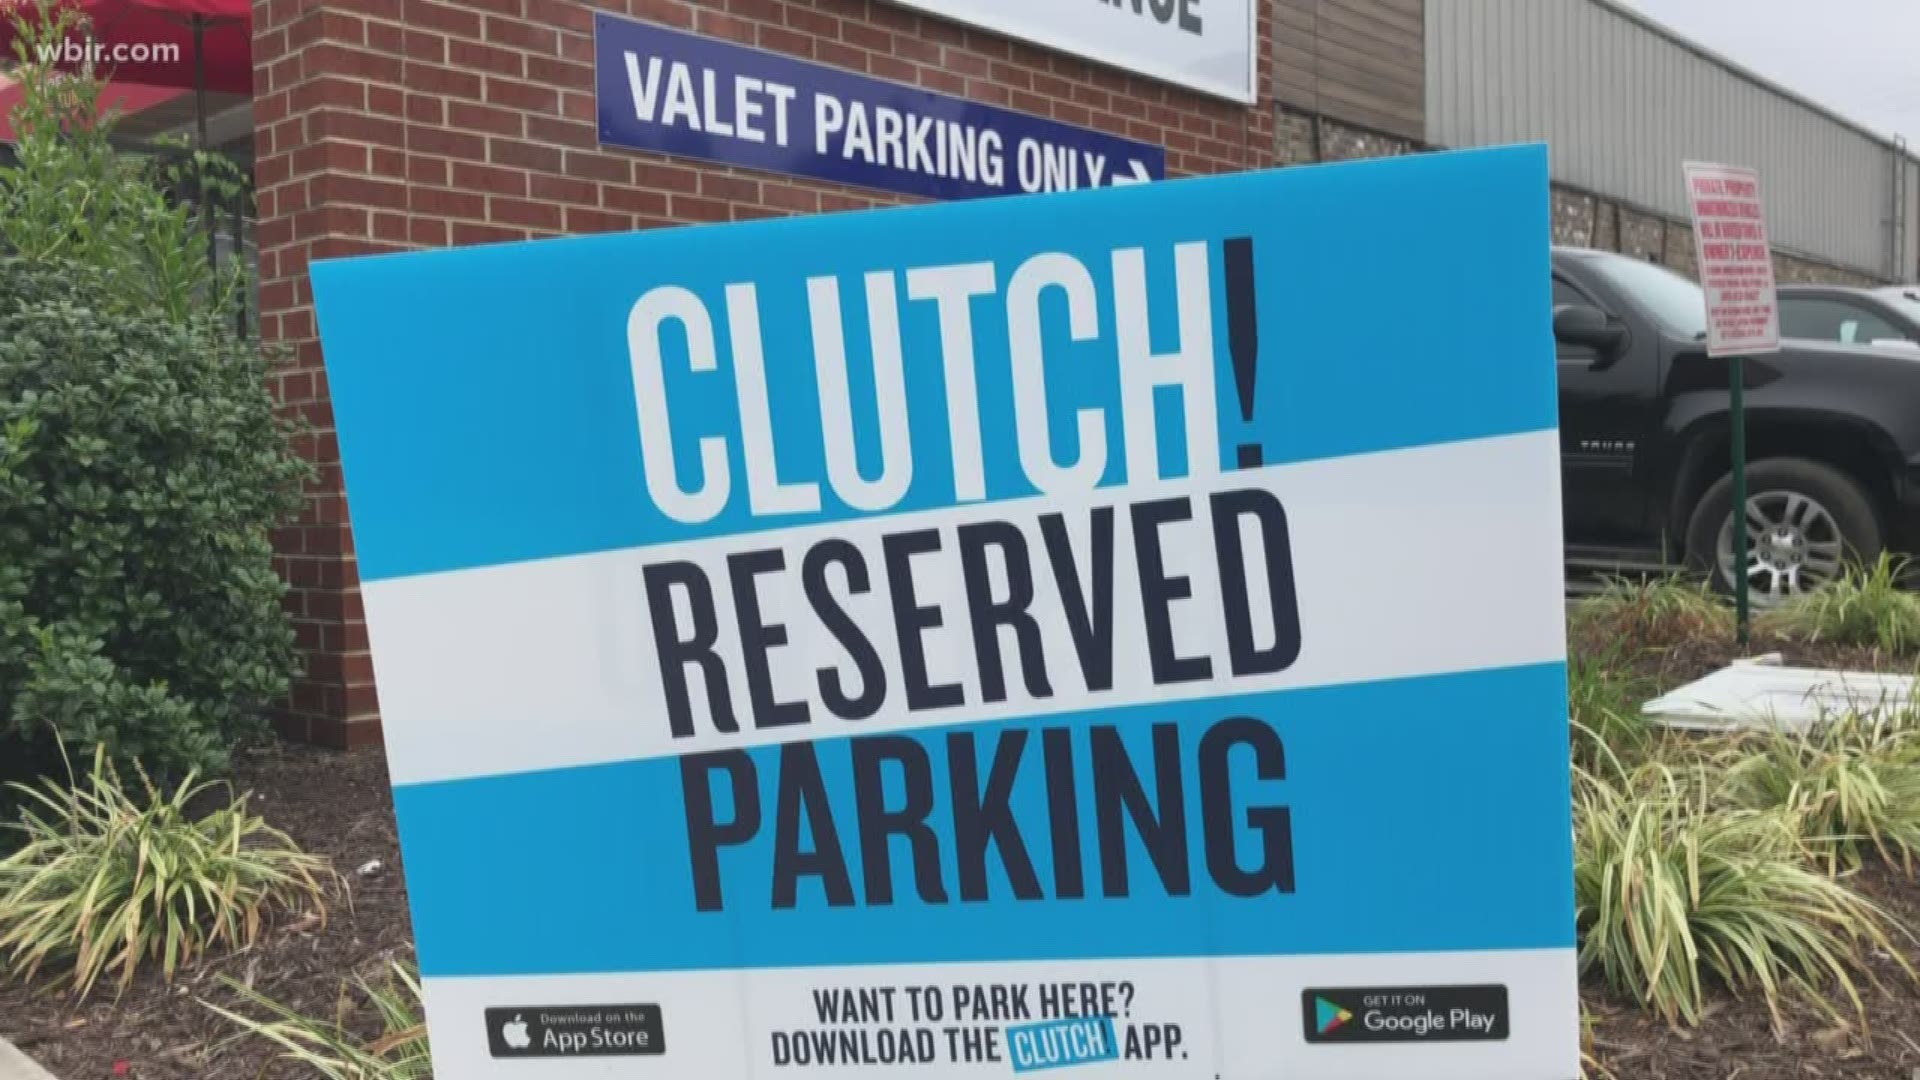 Finding parking on game day isn't always a fun experience. A new app is trying to make it easier for fans to find a tailgating spot.